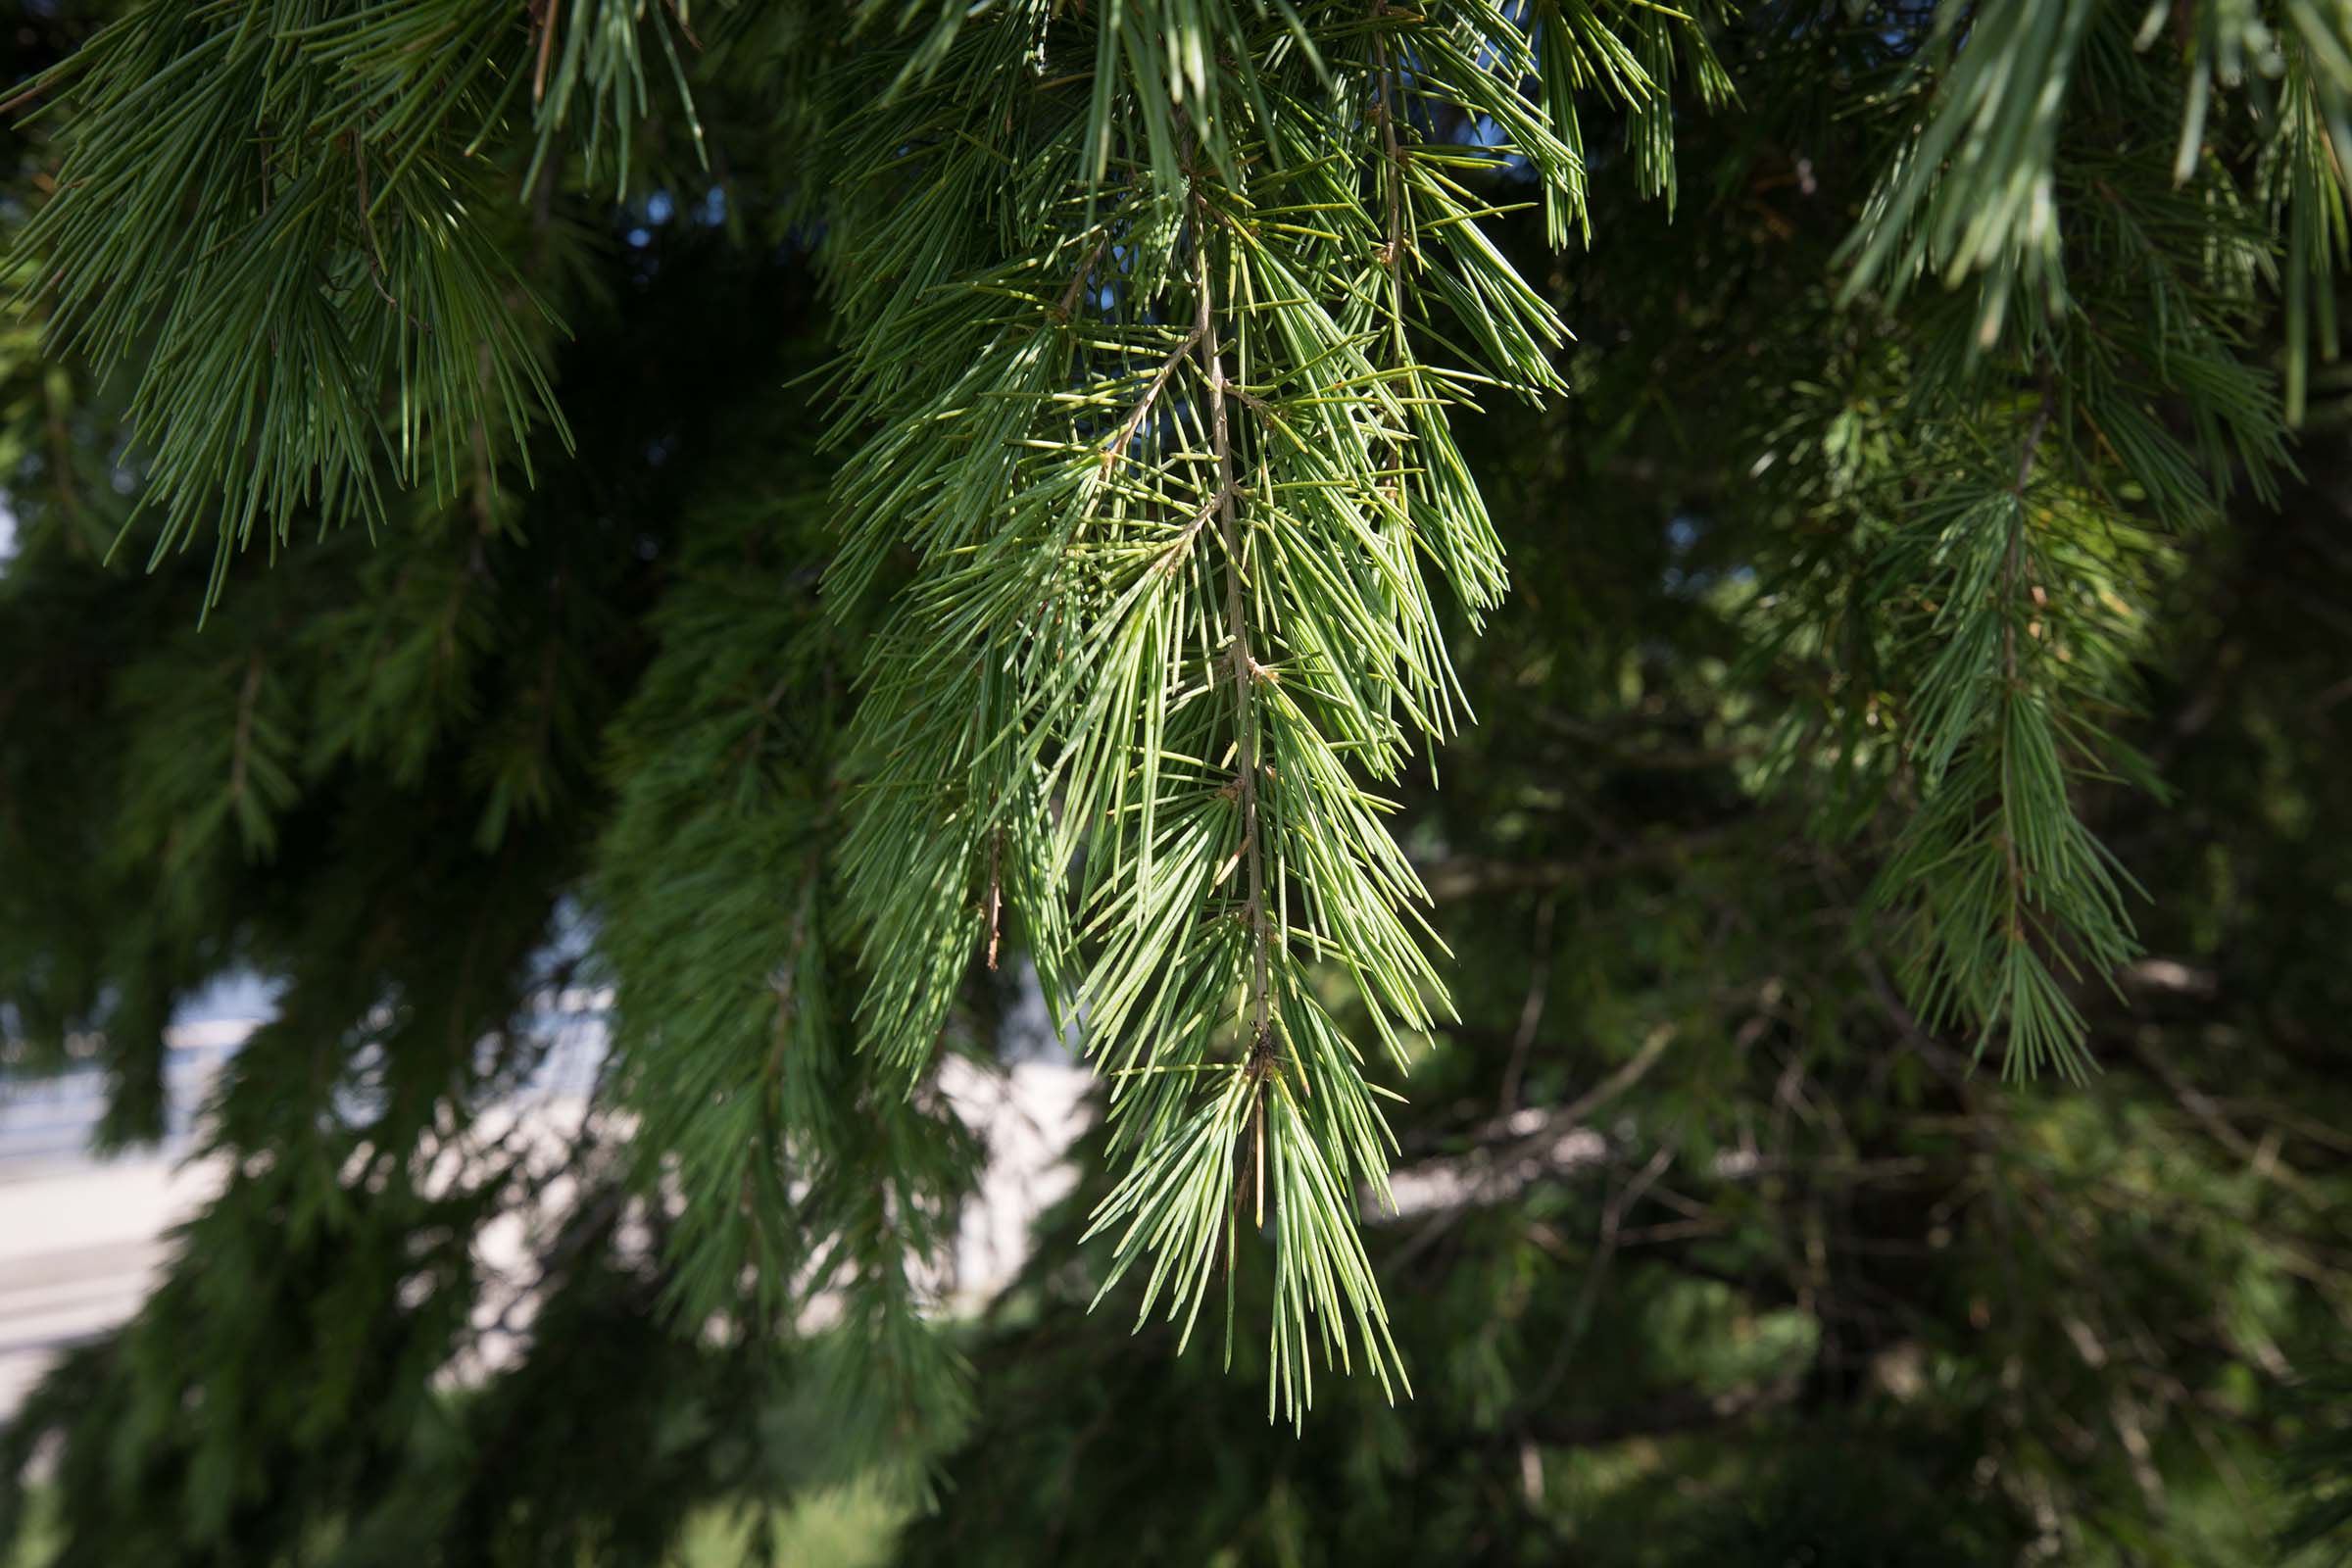 The deodar cedar tree's pine needles are green and sticky from the sap